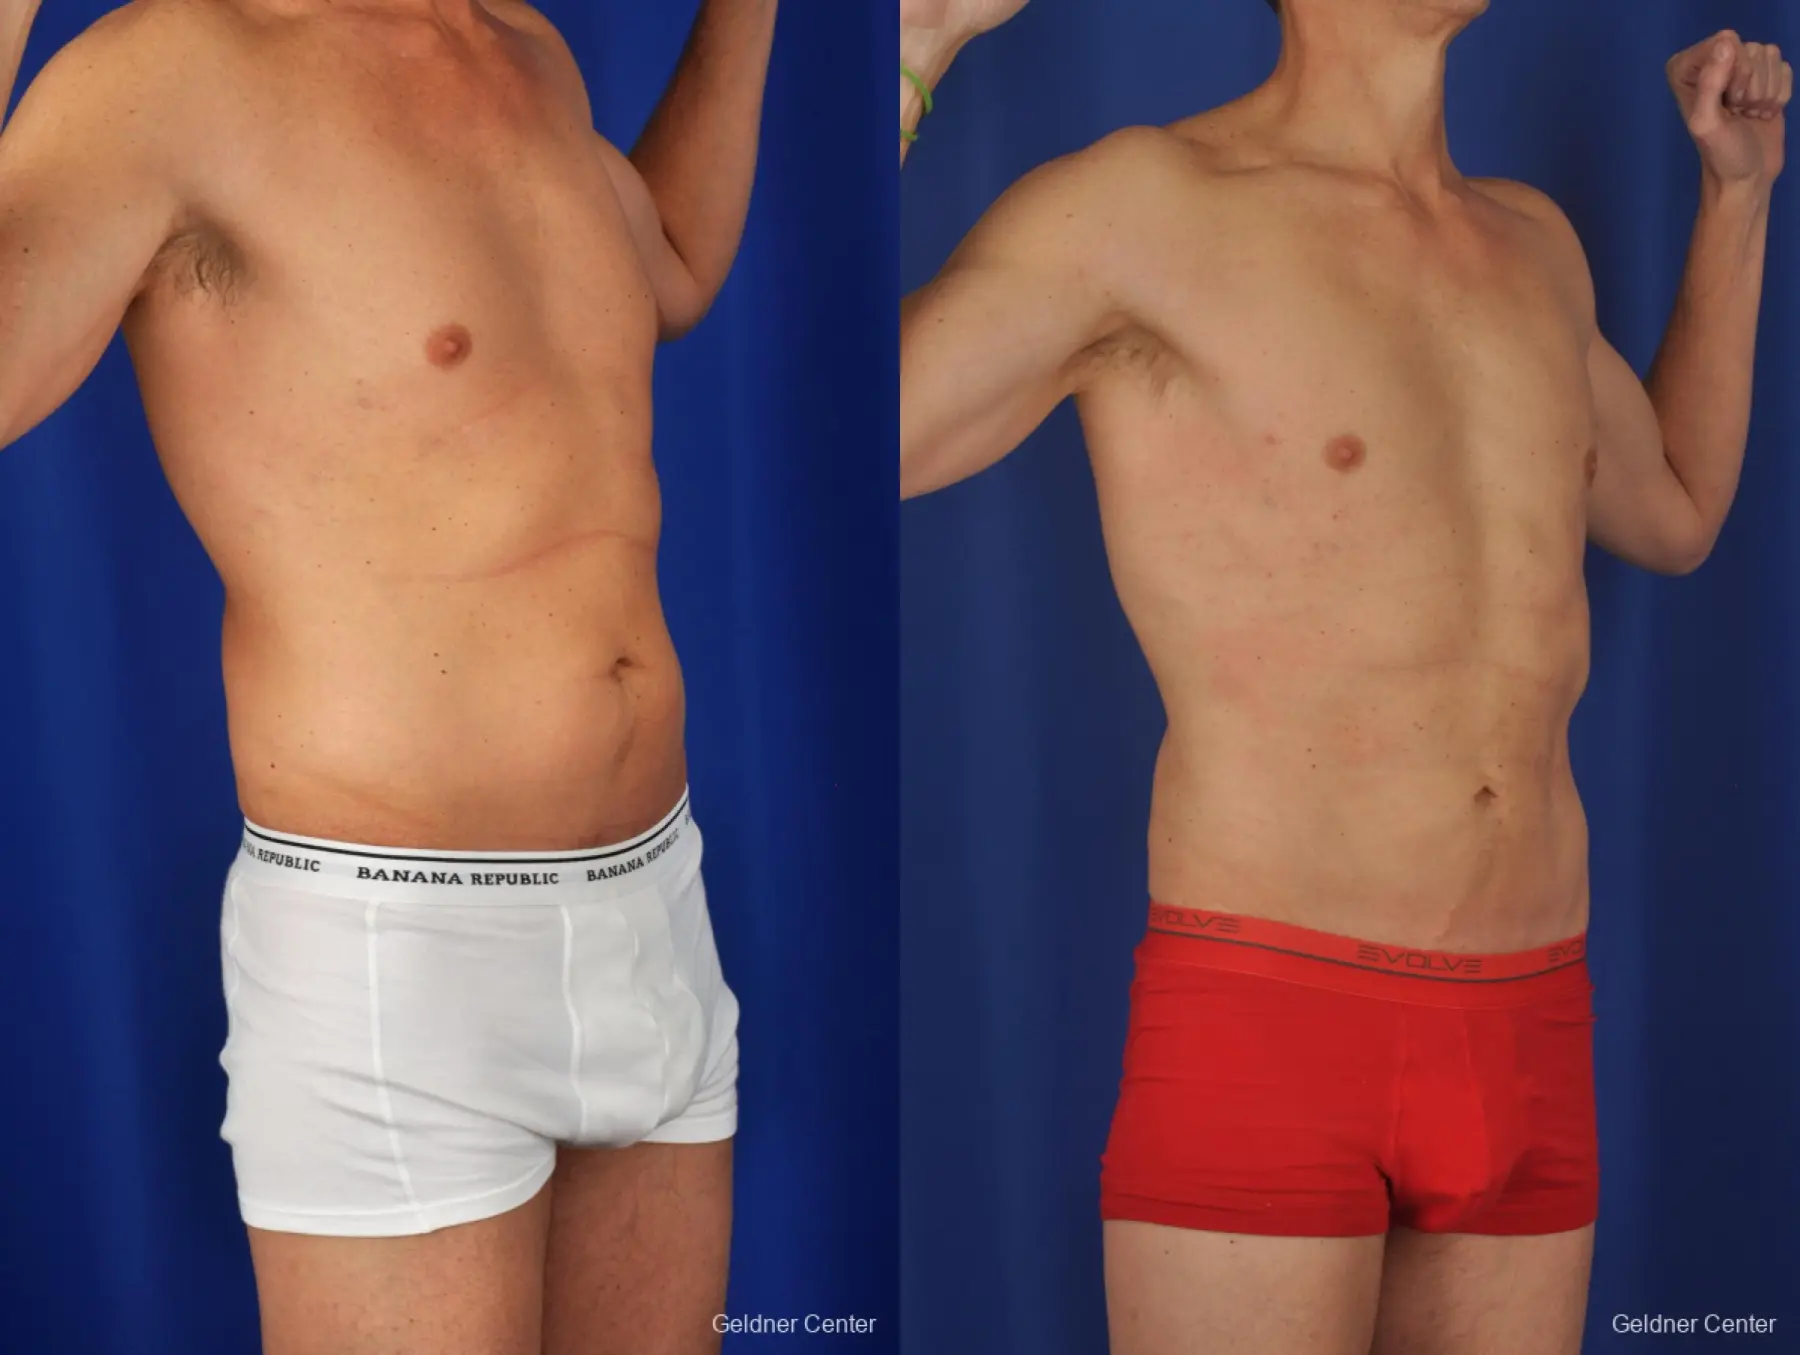 Liposuction For Men: Patient 2 - Before and After 2